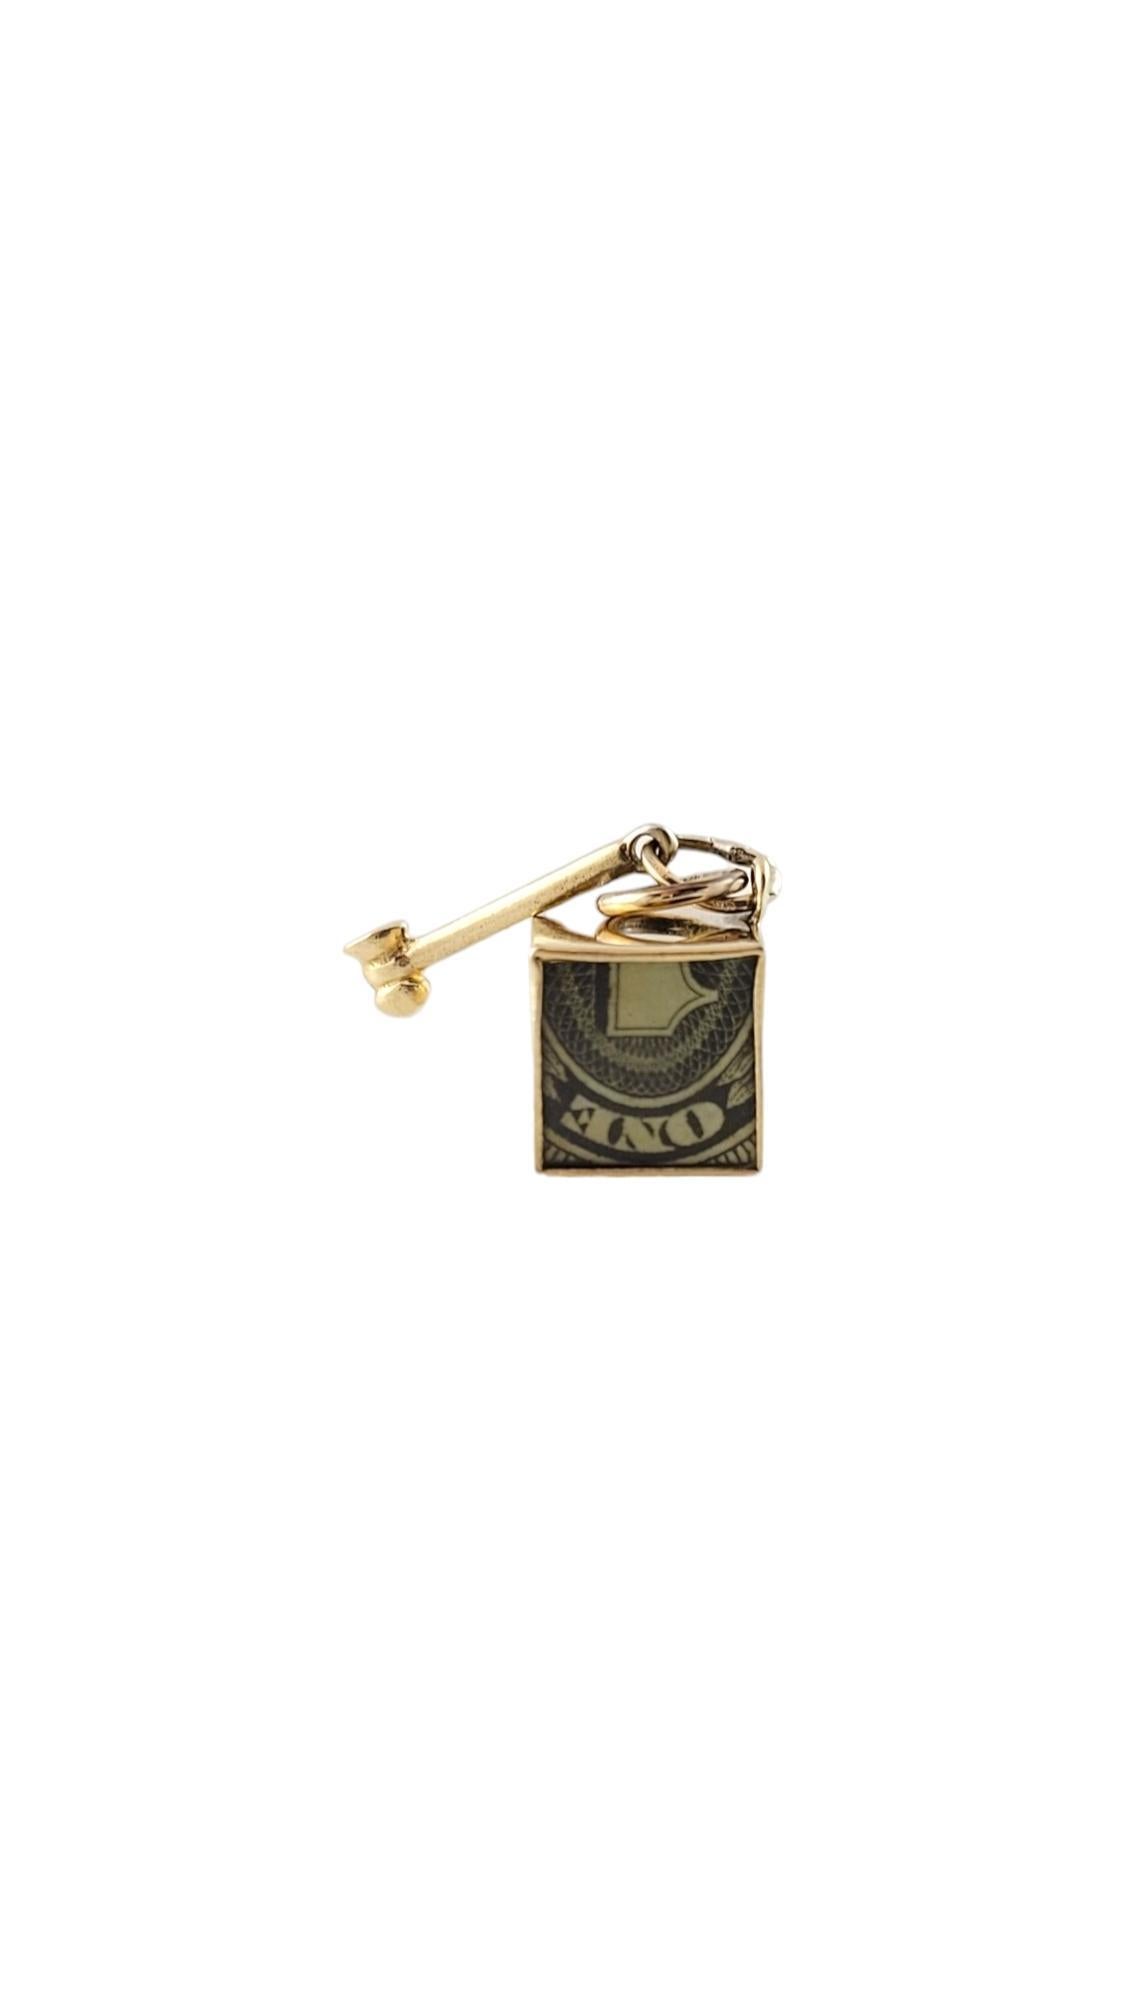 Vintage 14 Karat Yellow Gold Mad Money Box Charm -

This unique charm is crafted in 14K yellow gold and even contains a folded $1 bill! 

Size: 15.5 mm x 10.1 mm x 9.6 mm

Stamped: E14K

Weight: 2.4 dwt./ 3.8 gr.

*Chain not included.

Very good